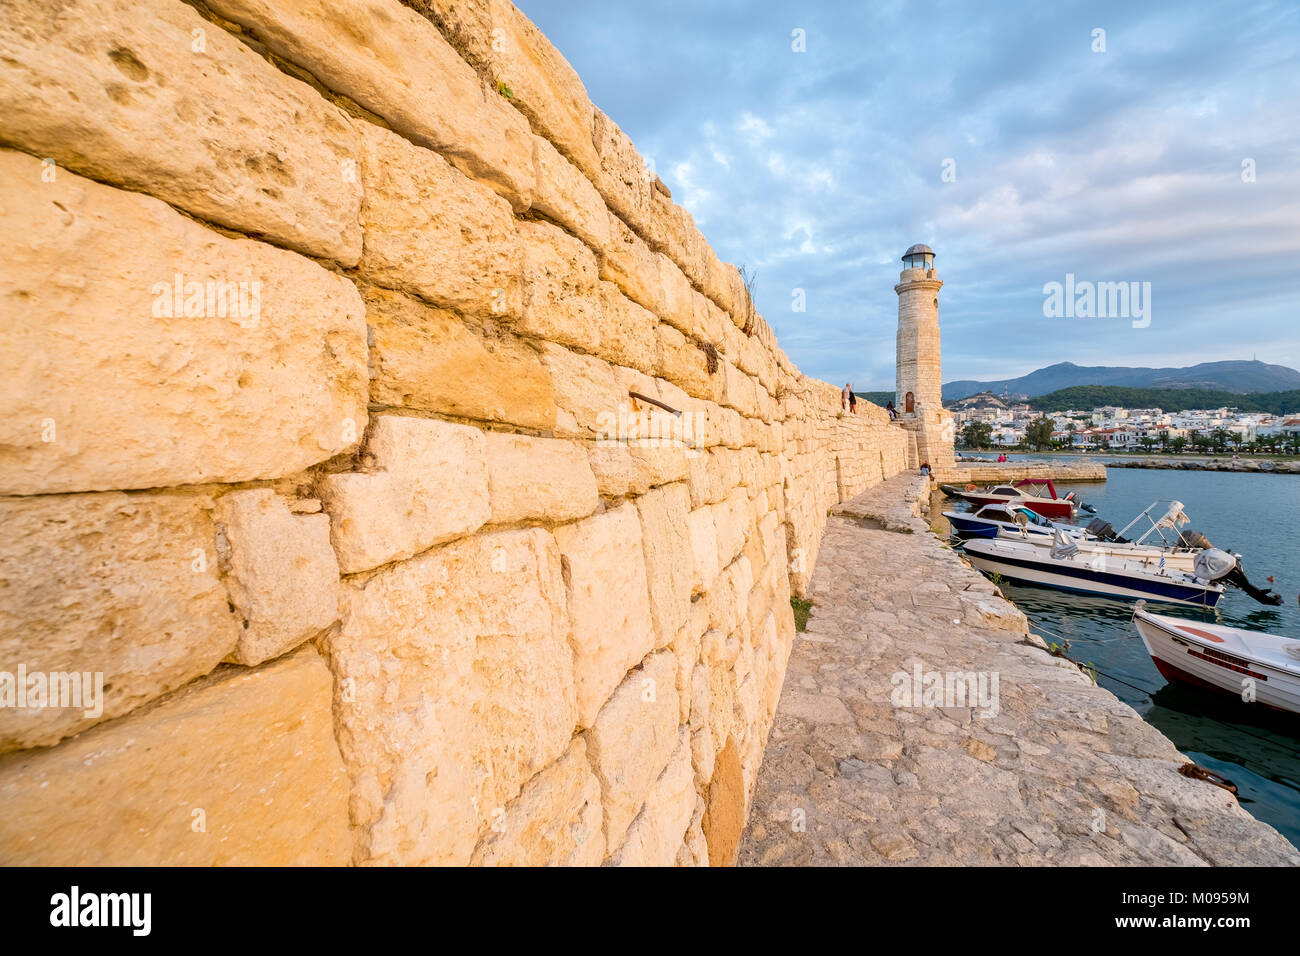 Rethimnon lighthouse in the evening mood with boats at the Venetian harbor, Rethymno, Rethimnon, Crete, Greece, Europe, Rethymno, Europe, Crete, Greec Stock Photo